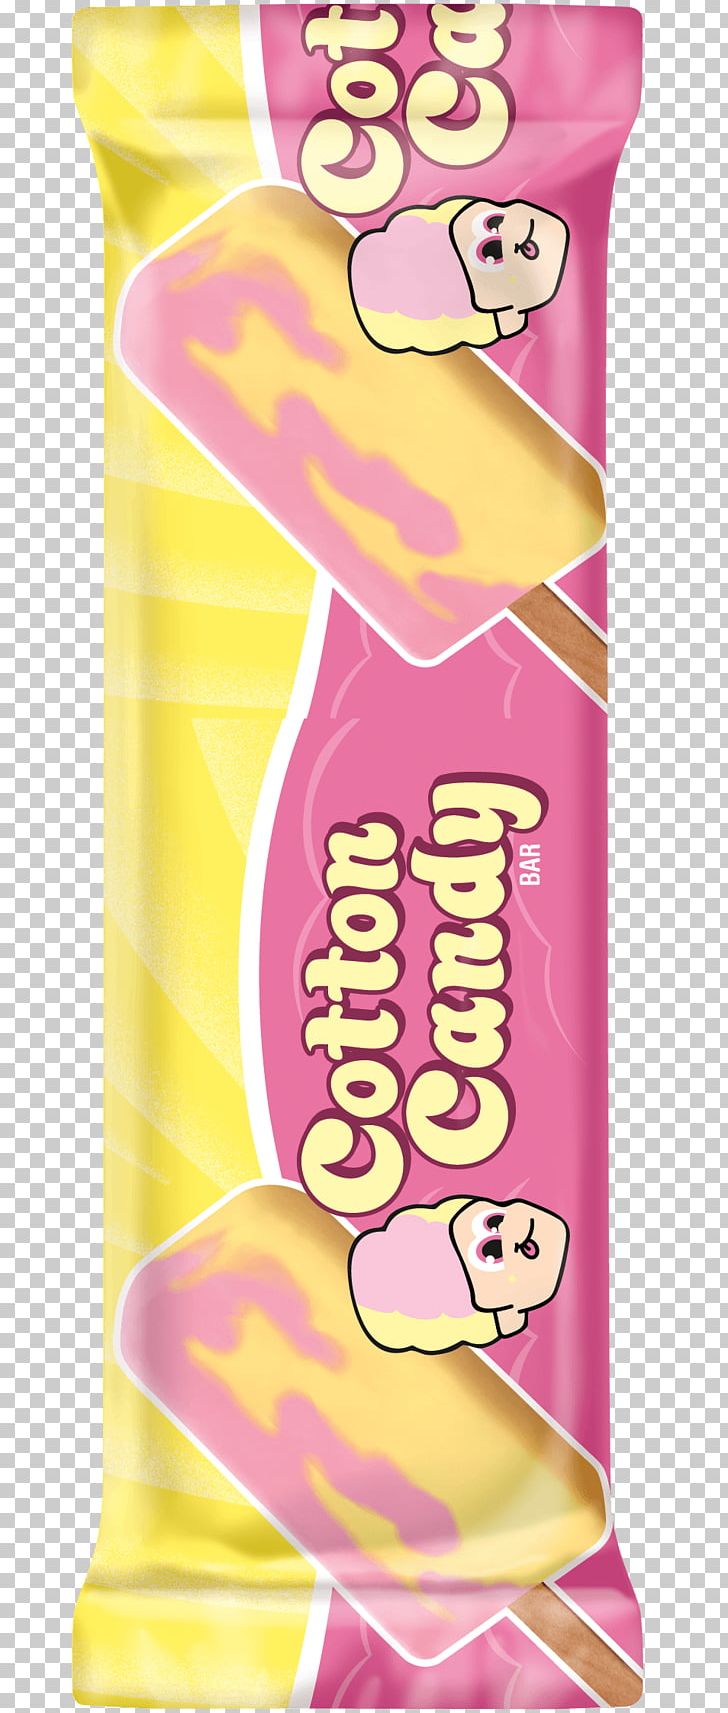 Junk Food Flavor Cartoon PNG, Clipart, Cartoon, Cotton Candy, Flavor, Food, Food Drinks Free PNG Download